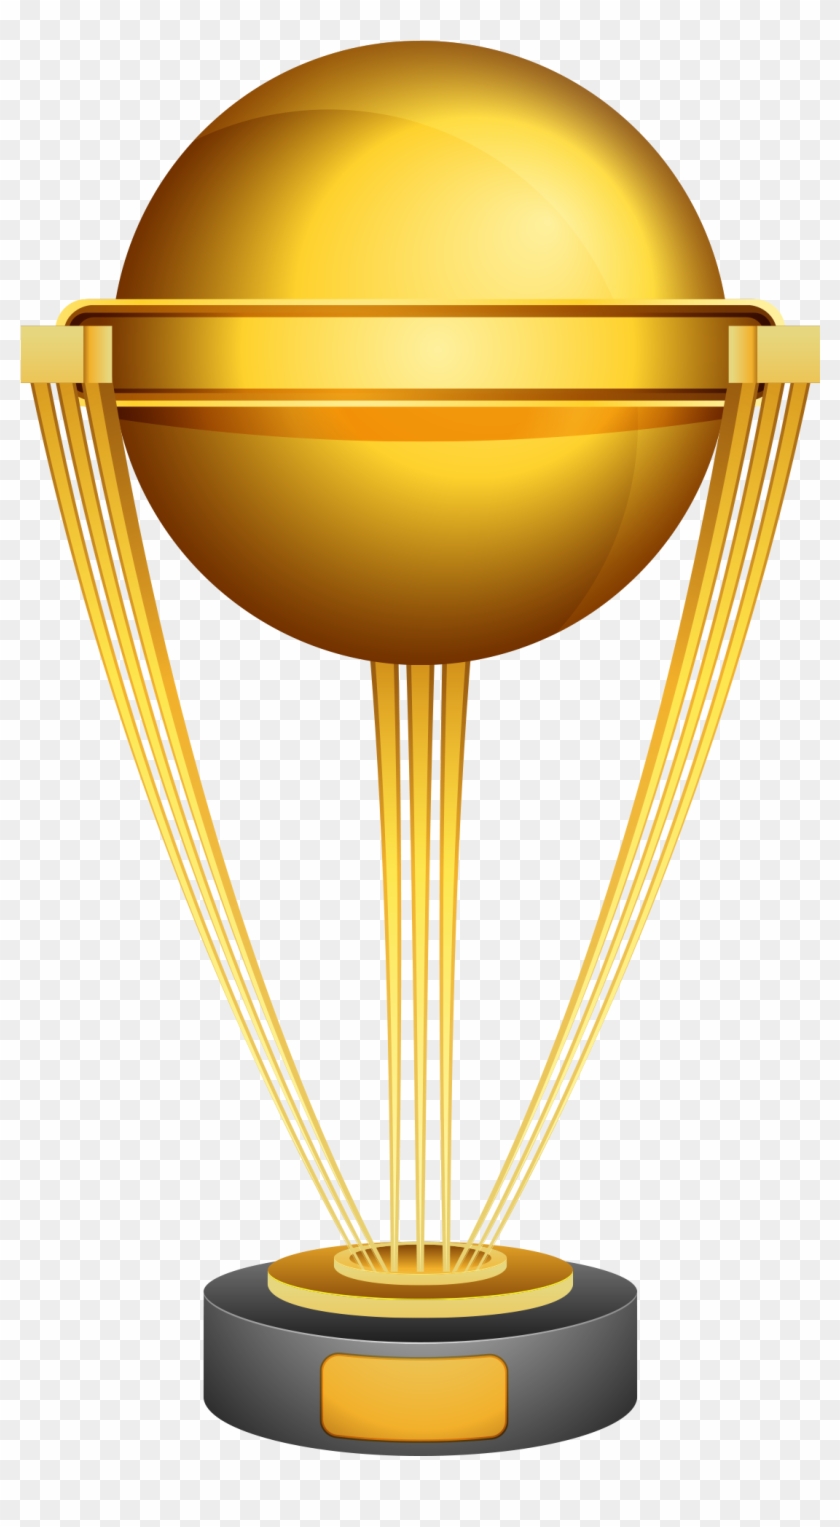 Download - Trophy Clipart #119347